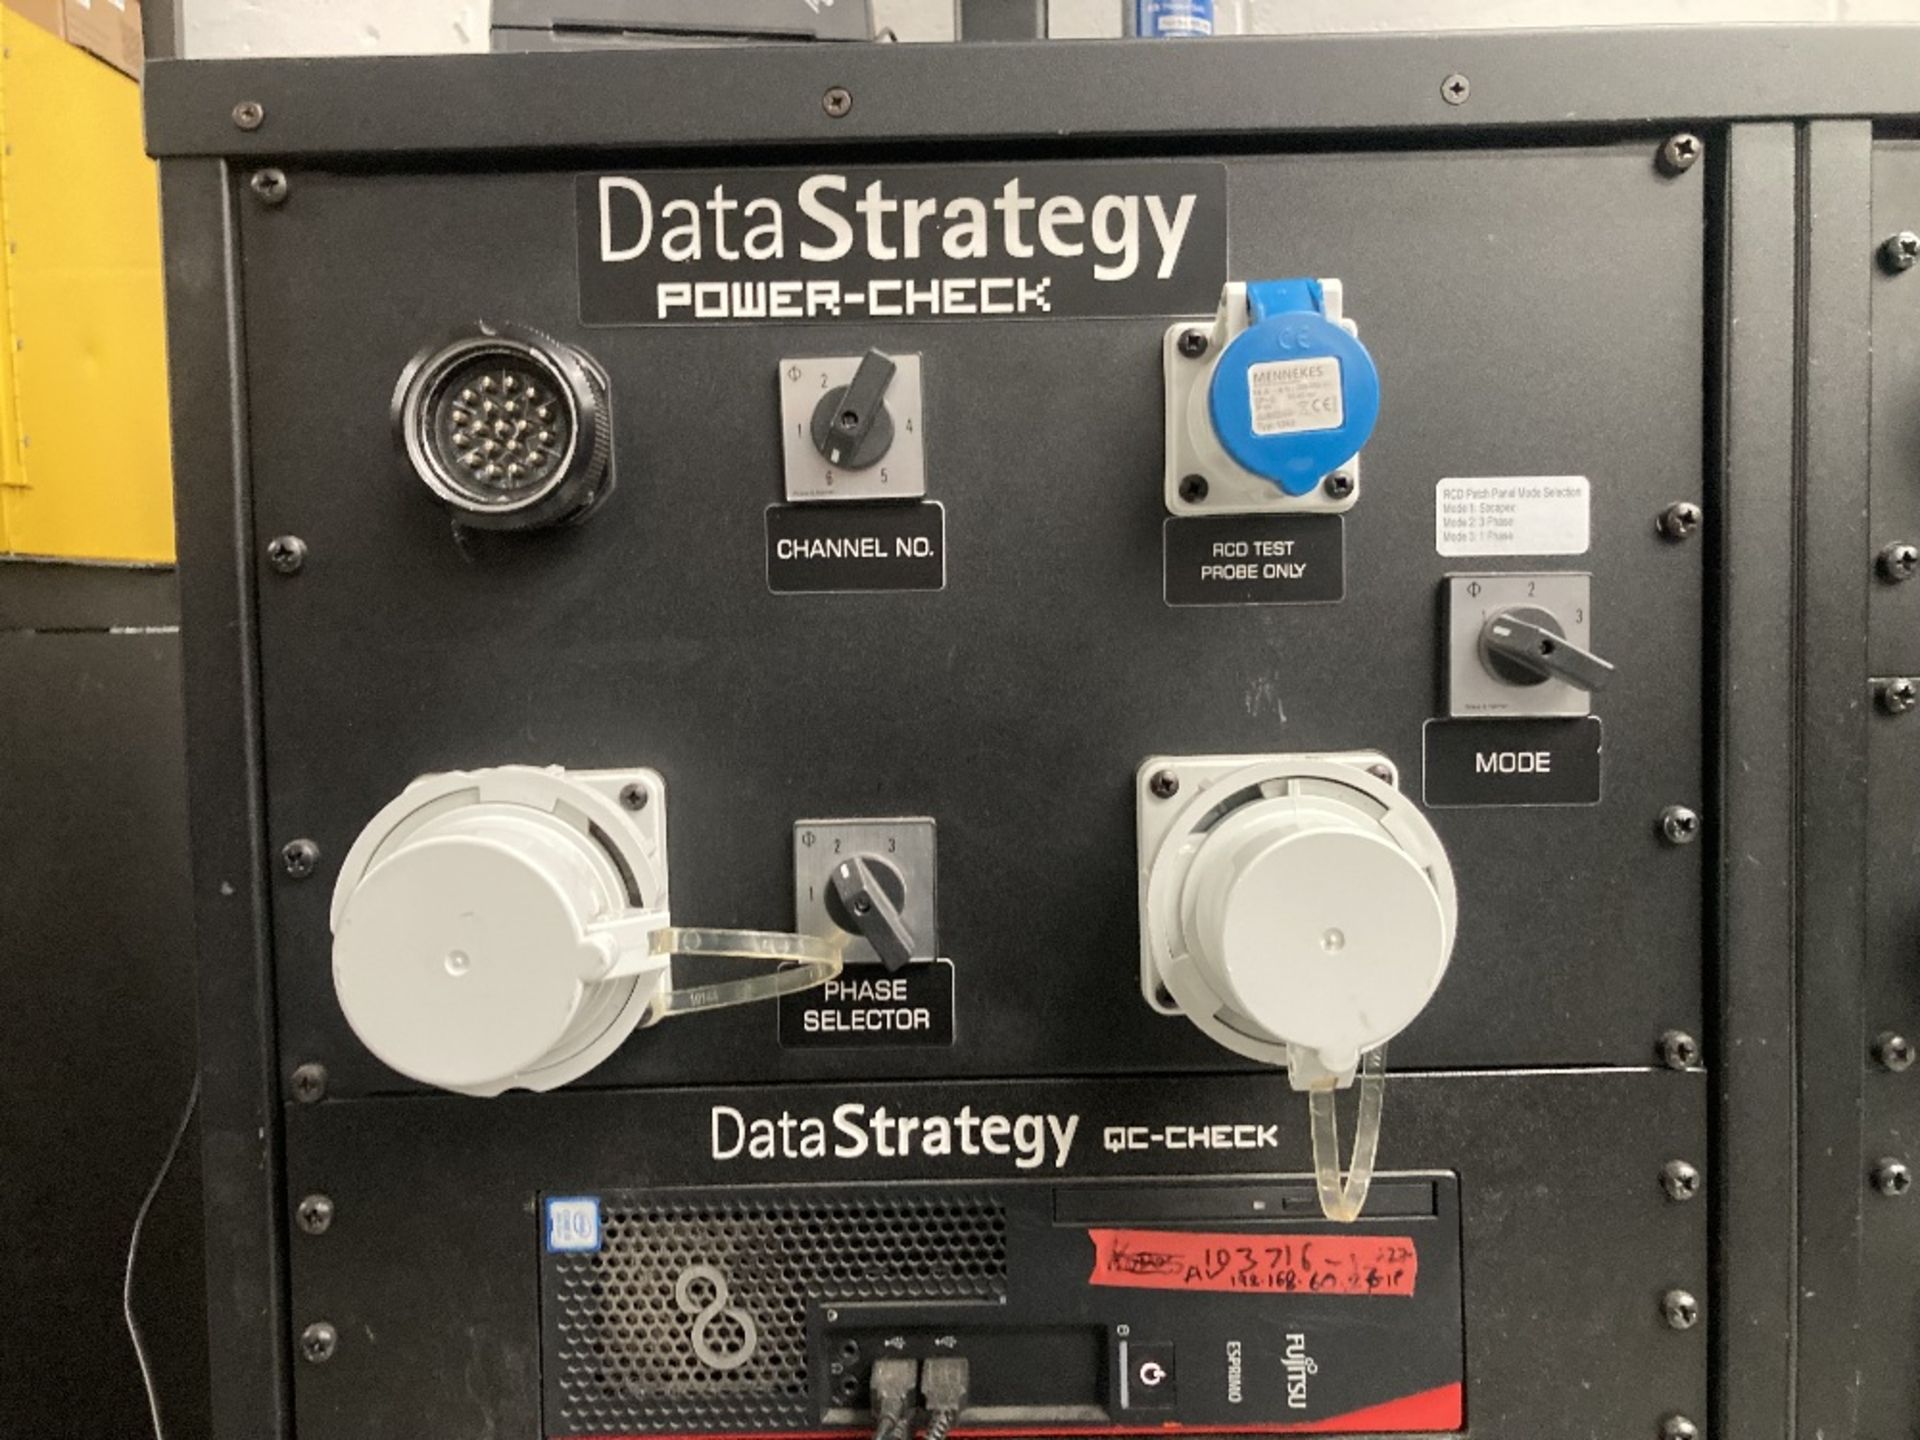 Data Strategy QC-Check Mobile Power Check Portable Appliance Test Processor PAT-4 - Image 10 of 17